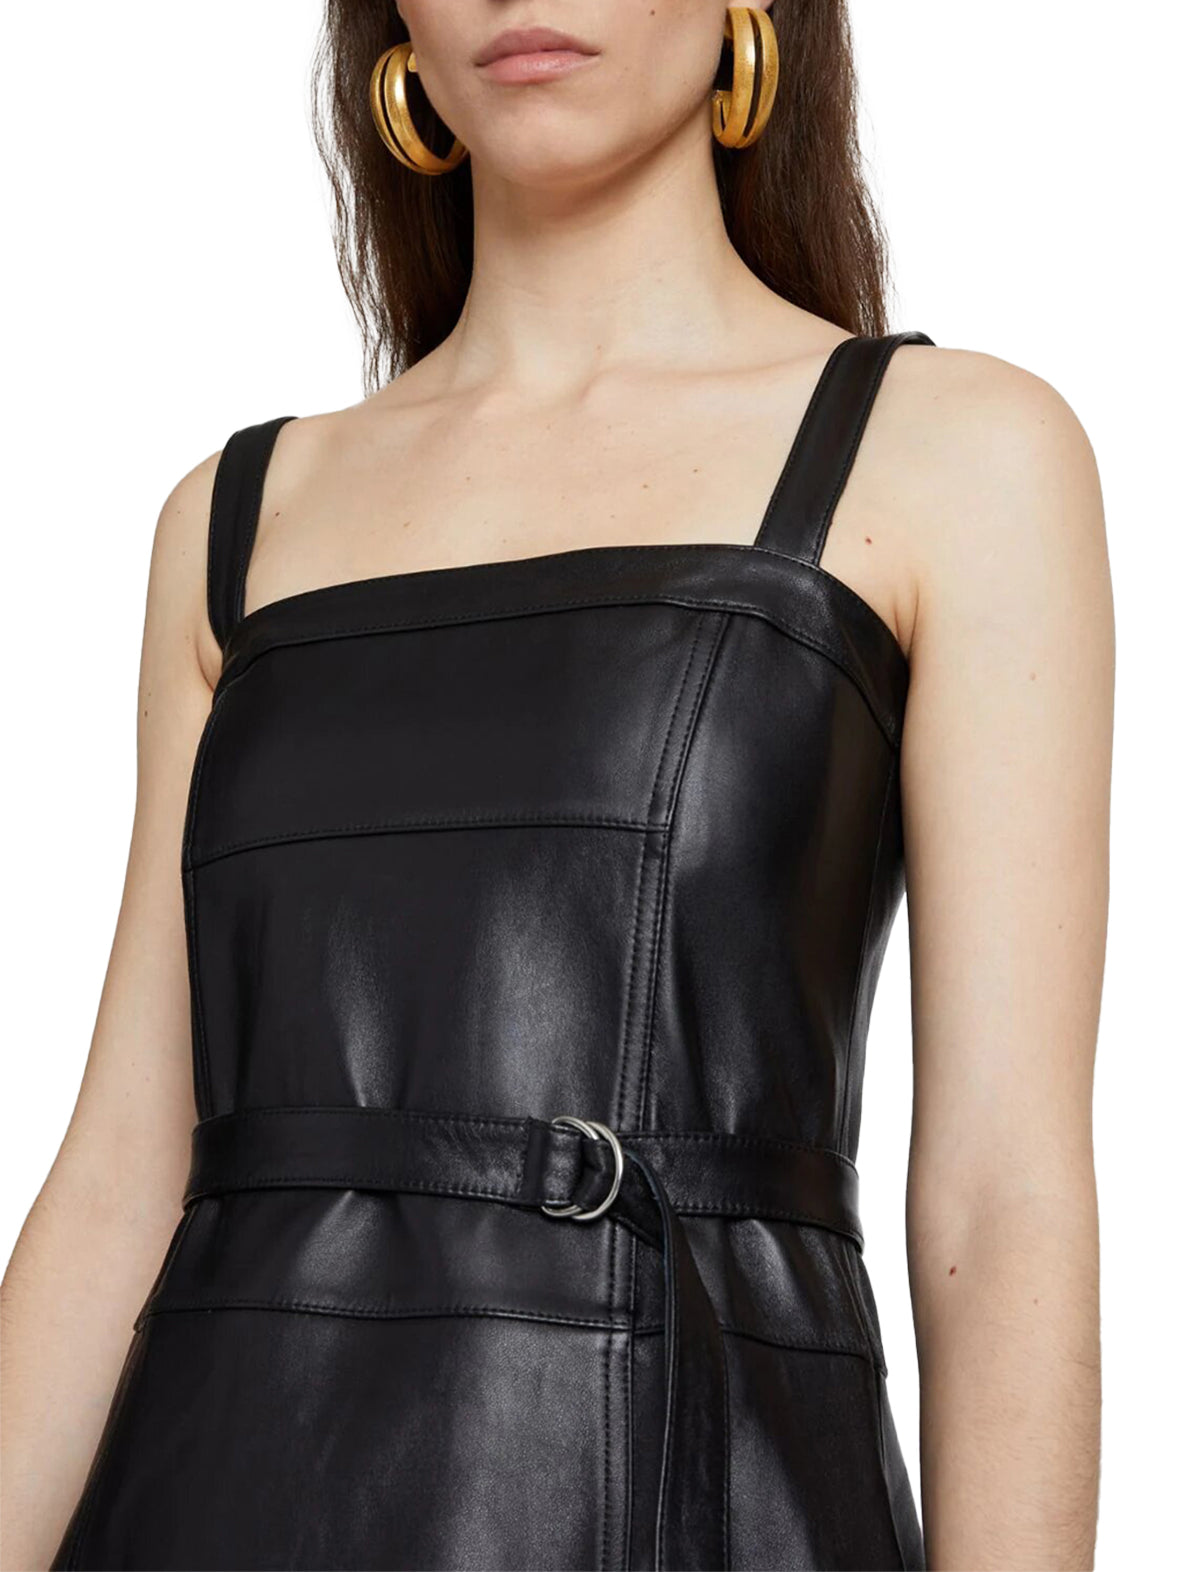 PROENZA SCHOULER WHITE LABEL Leather Belted Dress in Black